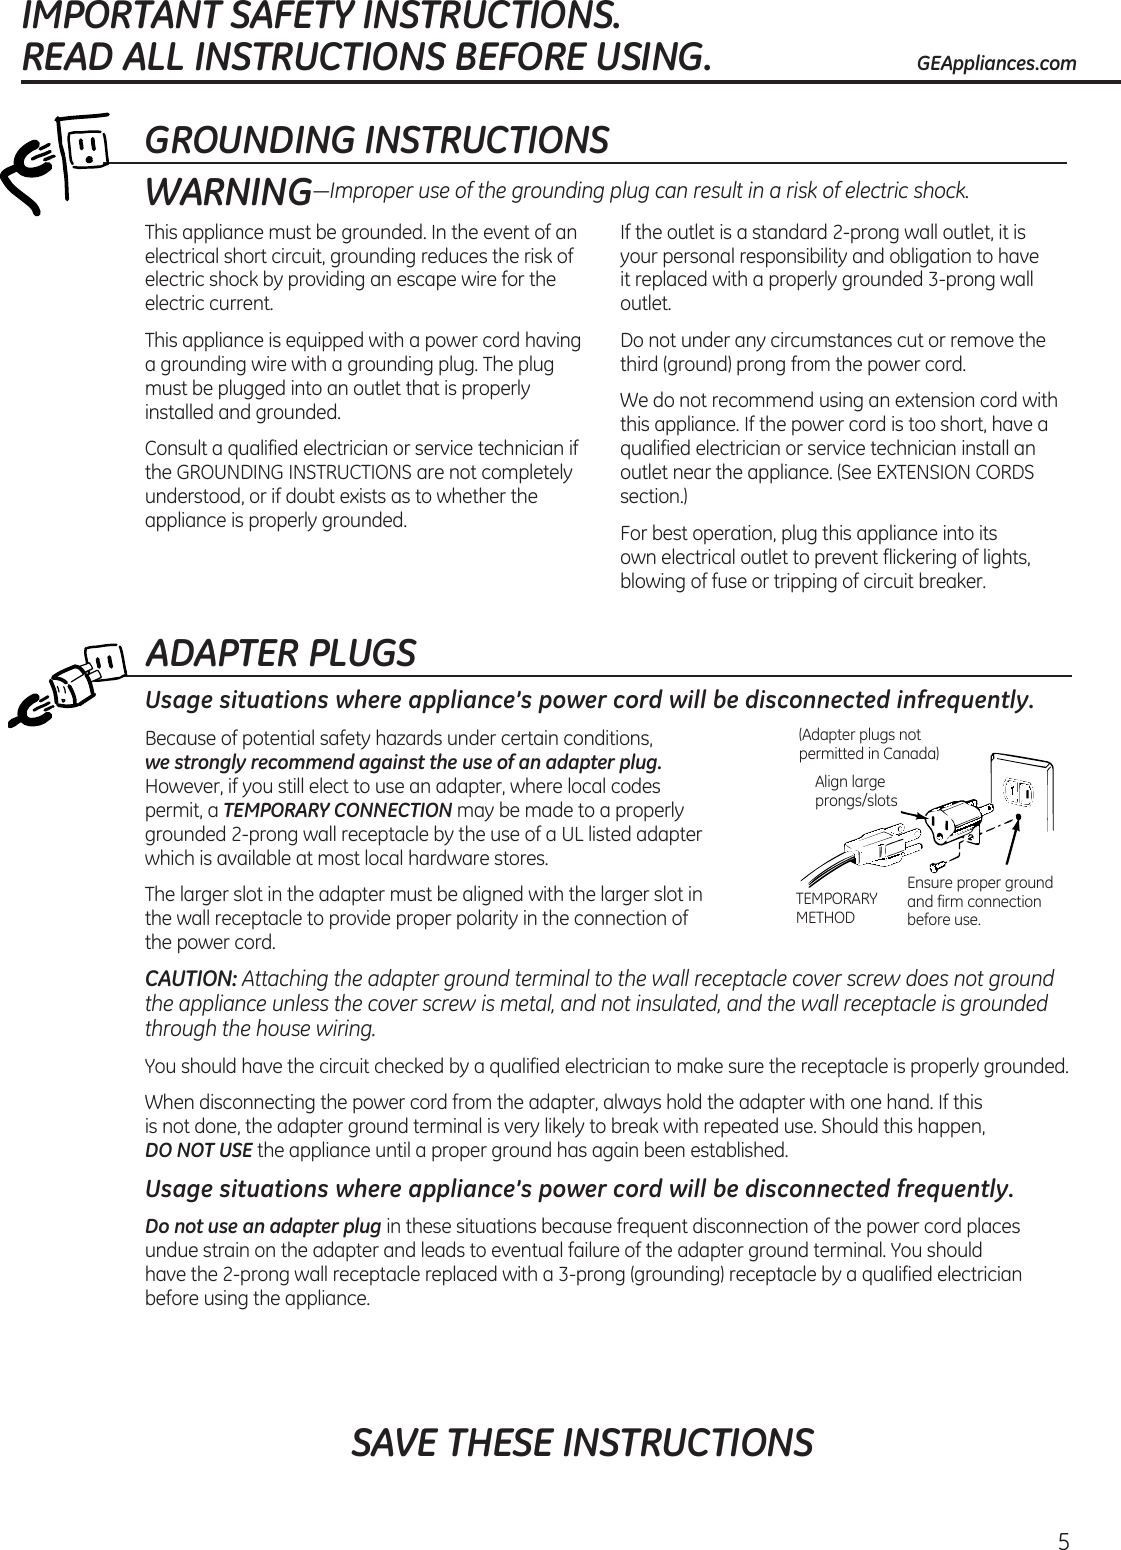 ADAPTER PLUGSUsage situations where appliance’s power cord will be disconnected infrequently.Because of potential safety hazards under certain conditions,   we strongly recommend against the use of an adapter plug. However, if you still elect to use an adapter, where local codes  permit, a TEMPORARY CONNECTION may be made to a properly grounded 2-prong wall receptacle by the use of a UL listed adapter  which is available at most local hardware stores.The larger slot in the adapter must be aligned with the larger slot in  the wall receptacle to provide proper polarity in the connection of  the power cord.CAUTION: Attaching the adapter ground terminal to the wall receptacle cover screw does not ground the appliance unless the cover screw is metal, and not insulated, and the wall receptacle is grounded through the house wiring. You should have the circuit checked by a qualified electrician to make sure the receptacle is properly grounded.When disconnecting the power cord from the adapter, always hold the adapter with one hand. If this  is not done, the adapter ground terminal is very likely to break with repeated use. Should this happen,  DO NOT USE the appliance until a proper ground has again been established.Usage situations where appliance’s power cord will be disconnected frequently.Do not use an adapter plug in these situations because frequent disconnection of the power cord places undue strain on the adapter and leads to eventual failure of the adapter ground terminal. You should  have the 2-prong wall receptacle replaced with a 3-prong (grounding) receptacle by a qualified electrician before using the appliance.Ensure proper ground and firm connection before use.TEMPORARY METHODAlign large prongs/slots(Adapter plugs not permitted in Canada)5GROUNDING INSTRUCTIONSThis appliance must be grounded. In the event of an electrical short circuit, grounding reduces the risk of electric shock by providing an escape wire for the electric current. This appliance is equipped with a power cord having a grounding wire with a grounding plug. The plug must be plugged into an outlet that is properly installed and grounded.Consult a qualified electrician or service technician if the GROUNDING INSTRUCTIONS are not completely understood, or if doubt exists as to whether the appliance is properly grounded.If the outlet is a standard 2-prong wall outlet, it is your personal responsibility and obligation to have it replaced with a properly grounded 3-prong wall outlet.Do not under any circumstances cut or remove the third (ground) prong from the power cord.We do not recommend using an extension cord with this appliance. If the power cord is too short, have a qualified electrician or service technician install an outlet near the appliance. (See EXTENSION CORDS section.)For best operation, plug this appliance into its  own electrical outlet to prevent flickering of lights, blowing of fuse or tripping of circuit breaker.WARNING—Improper use of the grounding plug can result in a risk of electric shock.SAVE THESE INSTRUCTIONSIMPORTANT SAFETY INSTRUCTIONS.  READ ALL INSTRUCTIONS BEFORE USING. GEAppliances.com